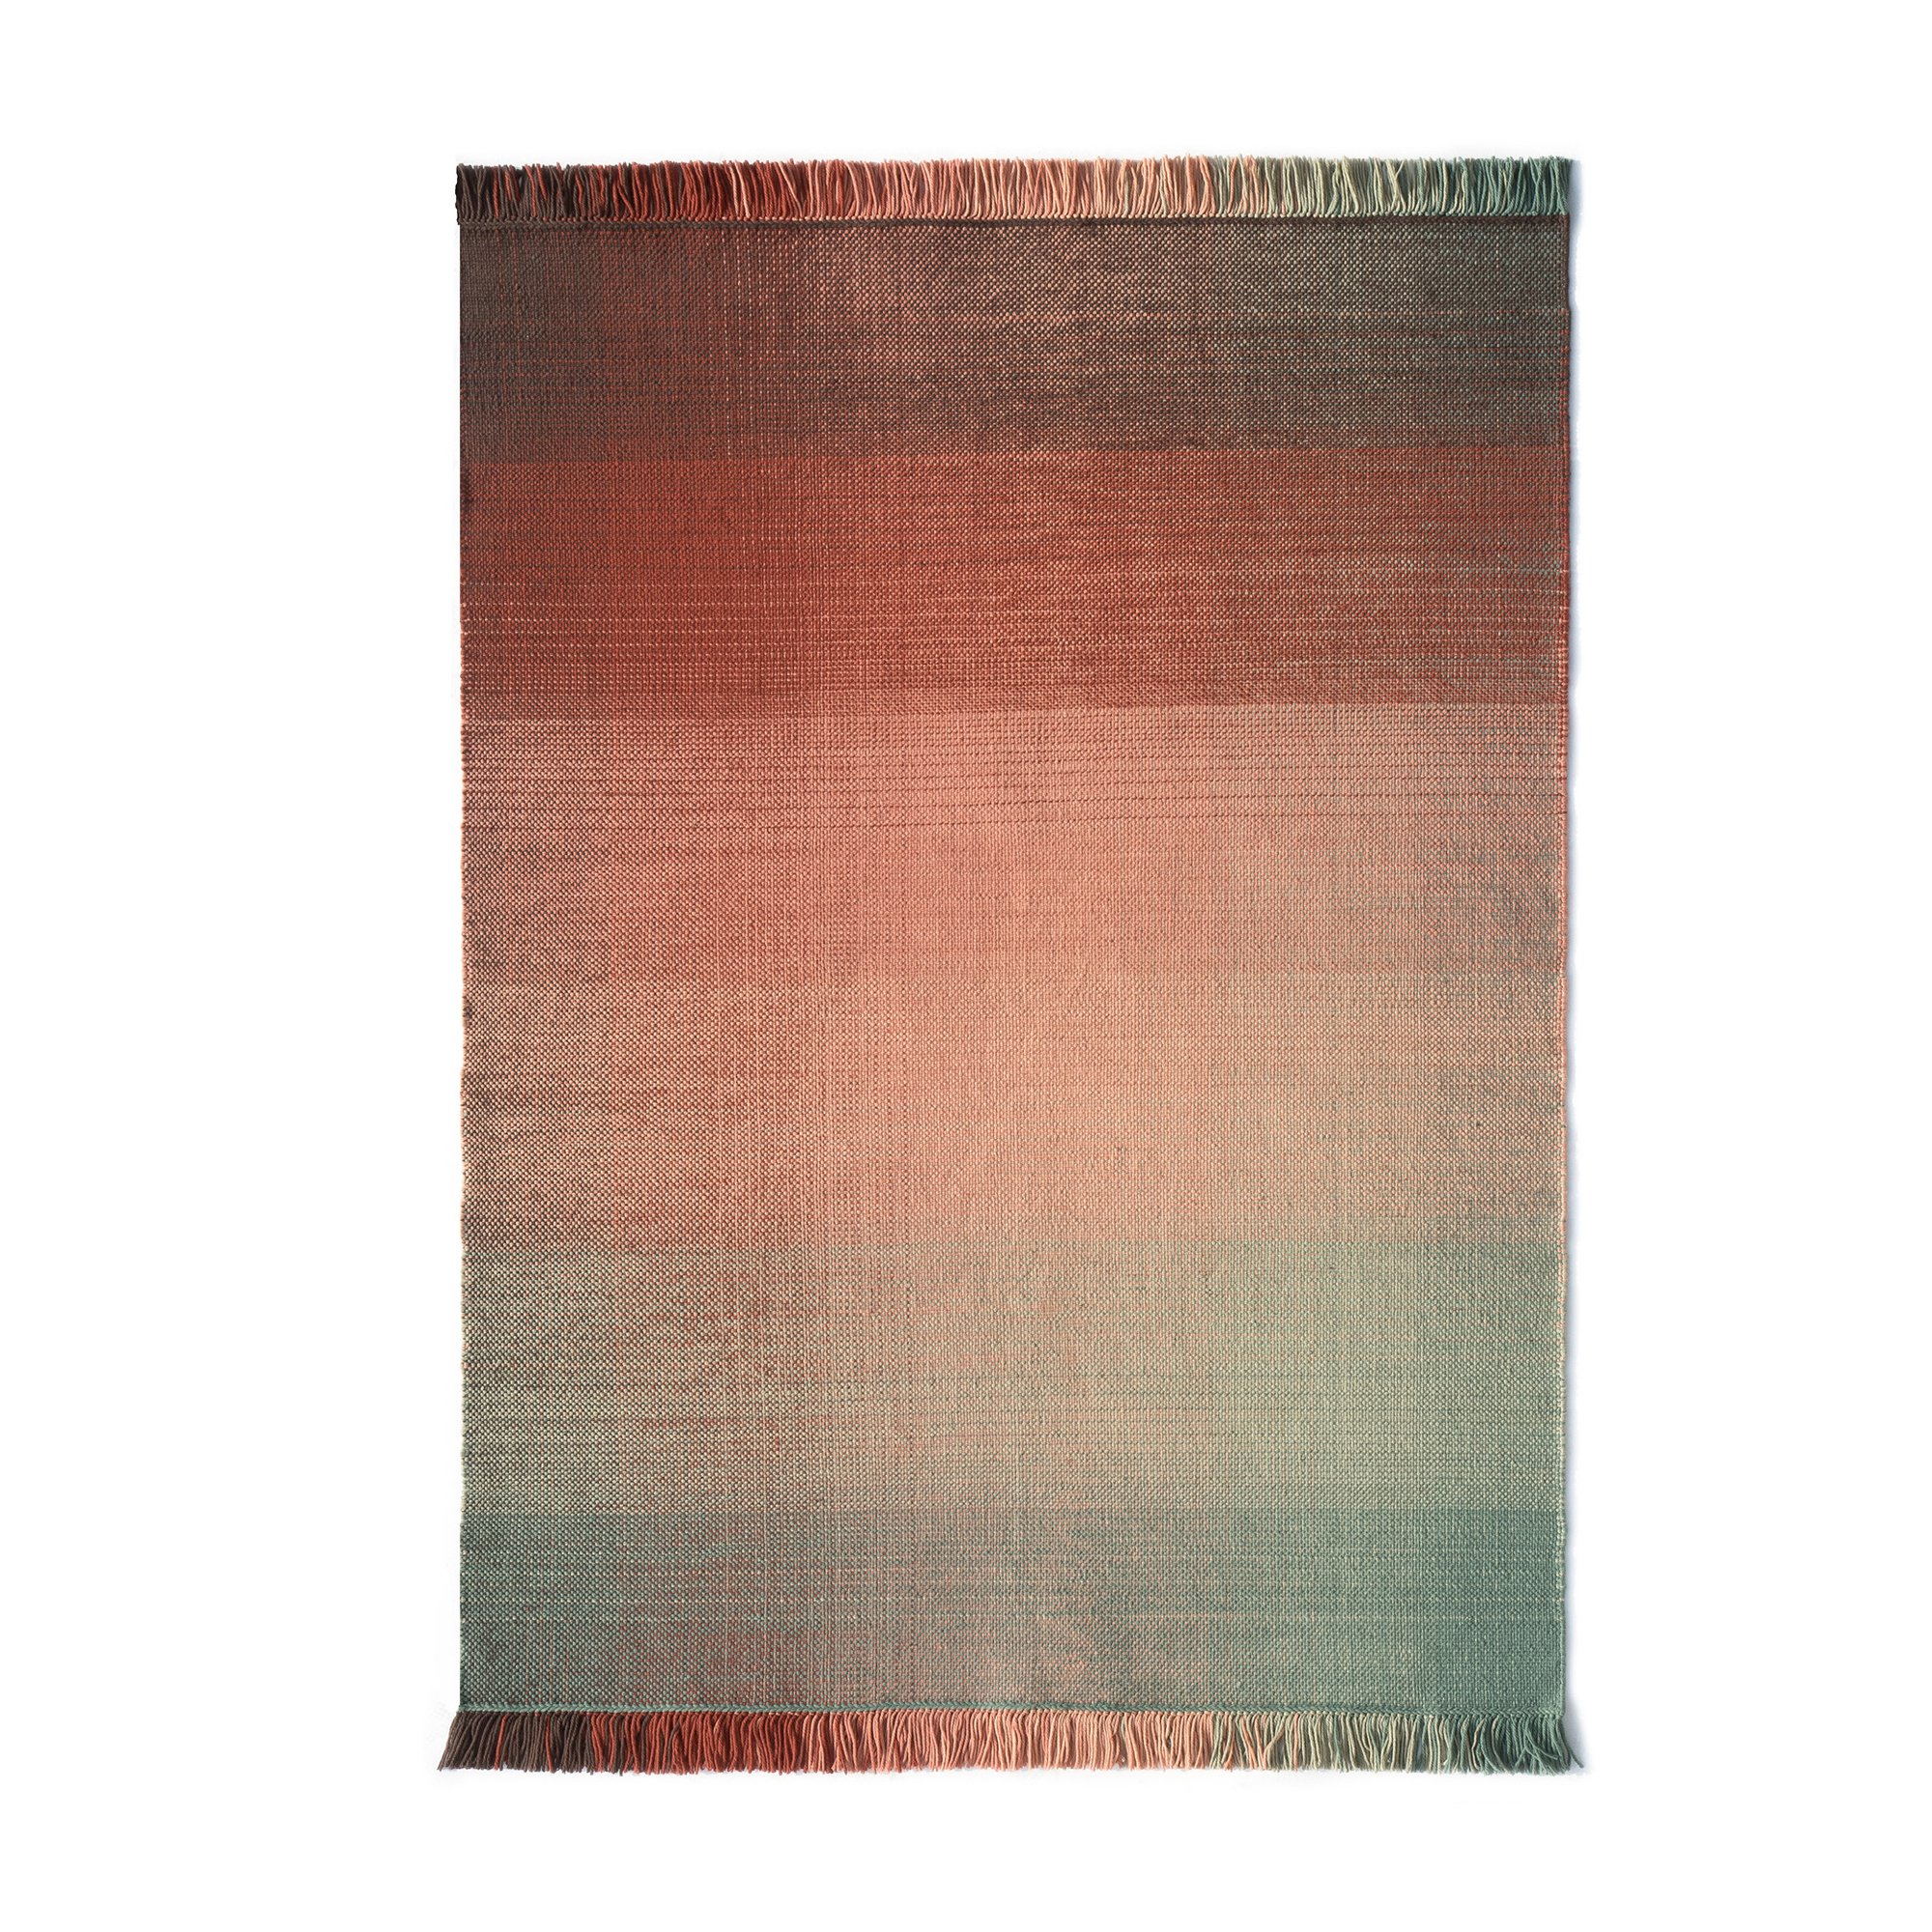 Shade Palette 1 Outdoor Rug 300cm x 400cm By nanimarquina